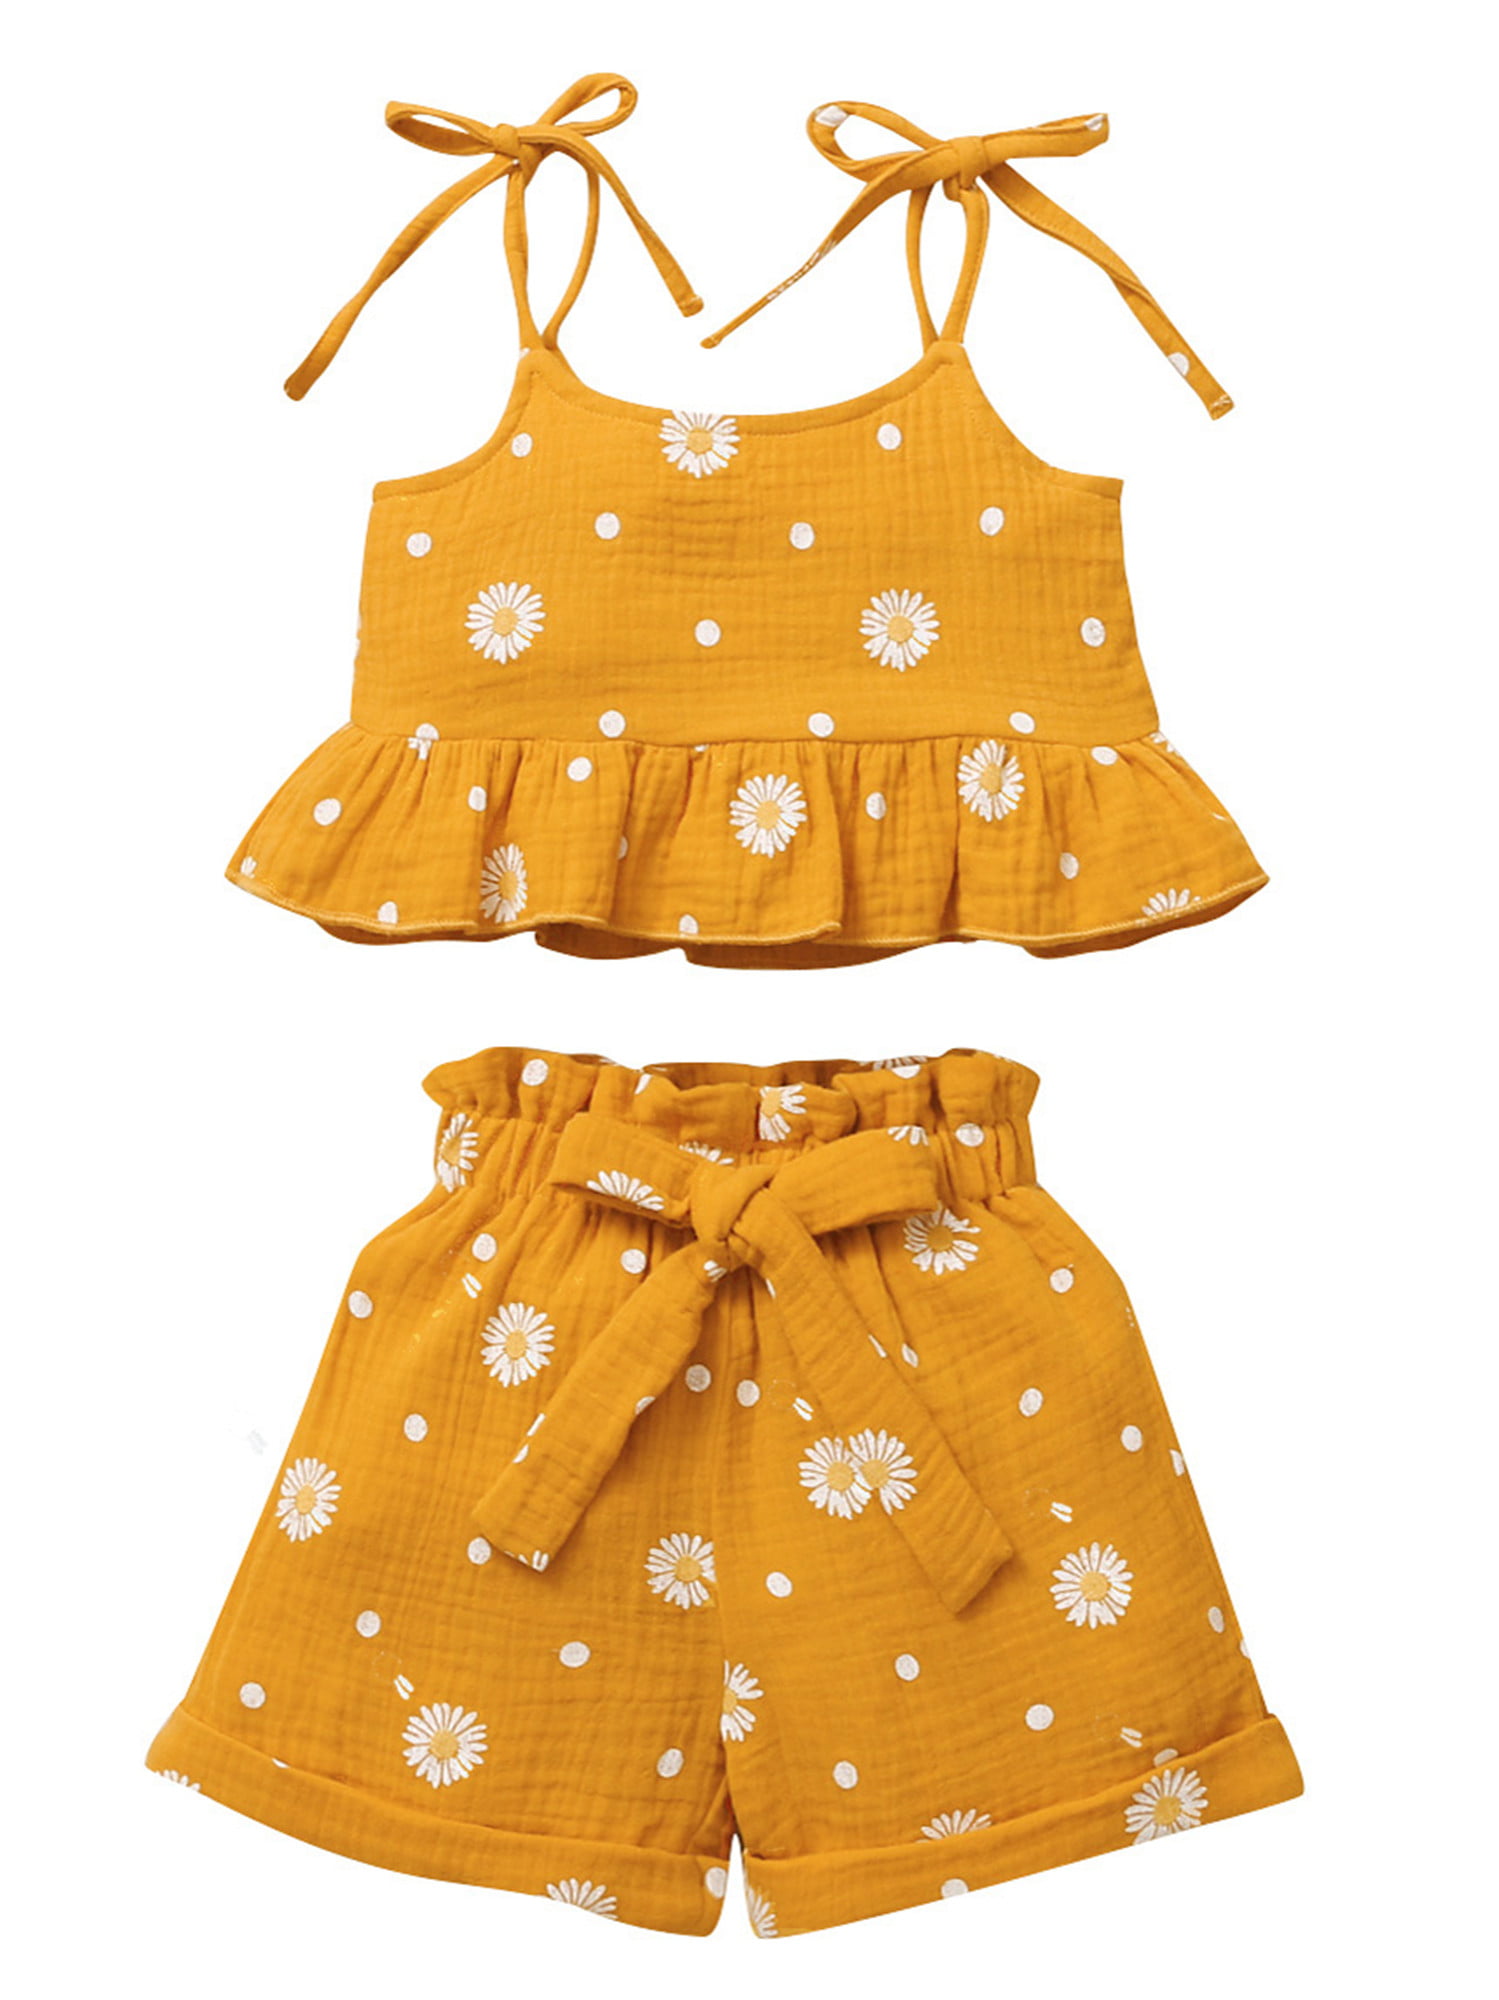 Toddler Baby Girl Summer Clothing Floral Strap Ruffle Top and Shorts Set 2 PCS Outfits